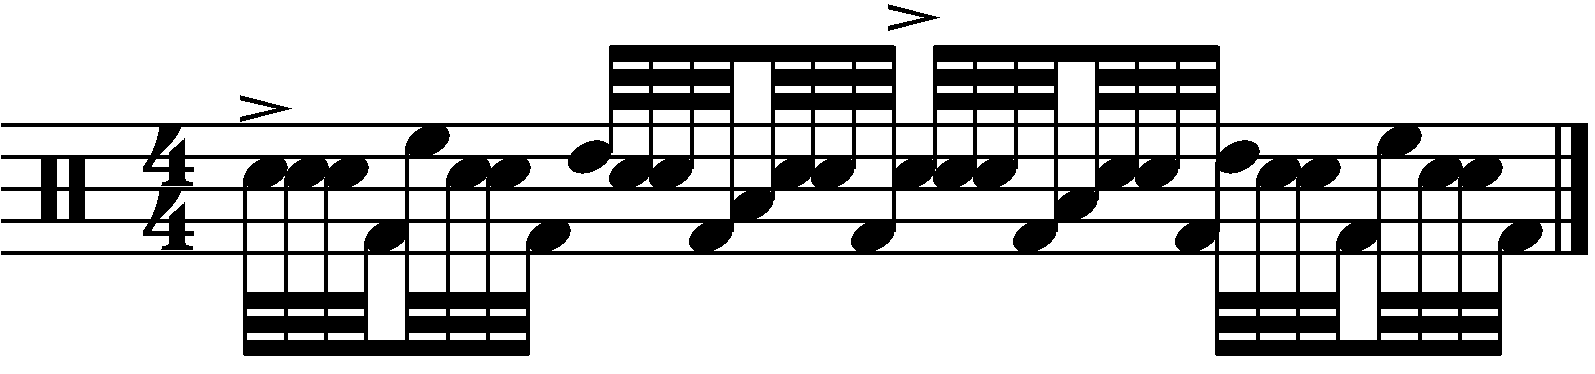 A fill based on the R L L F pattern played as 32nd notes